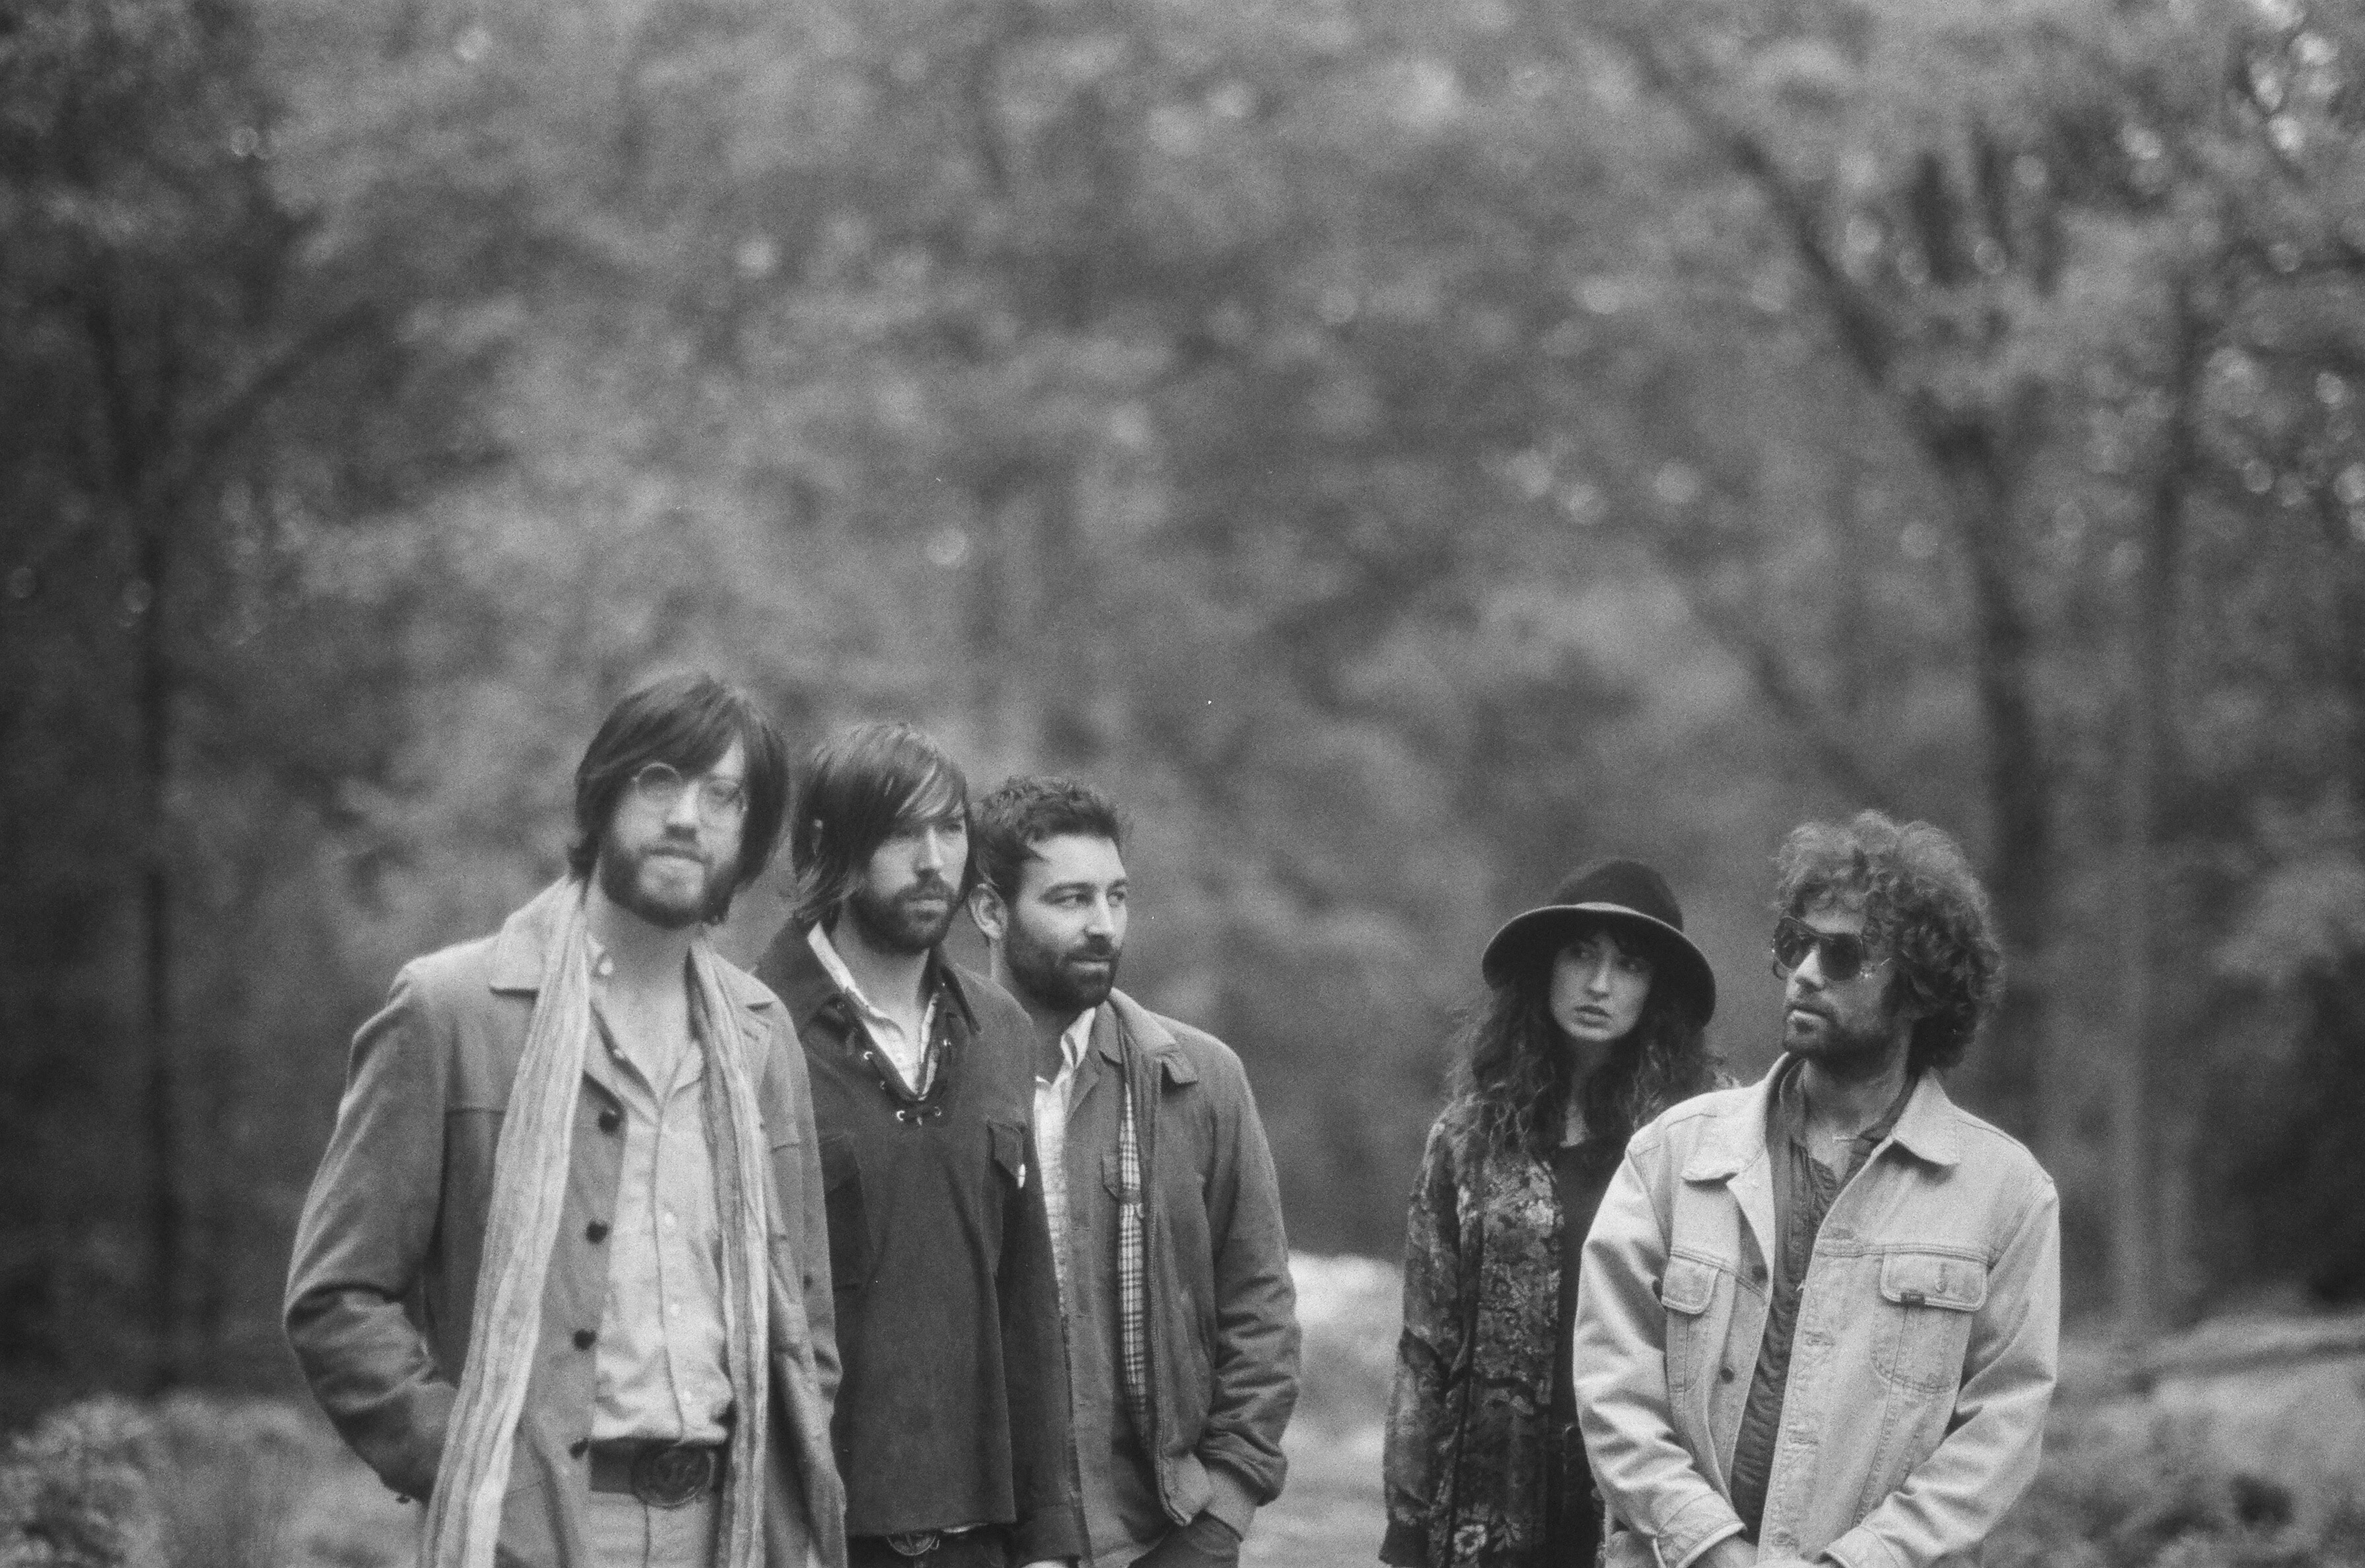 Okkervil River Frontman Will Sheff Sings Post-Mortem For Band in New Video